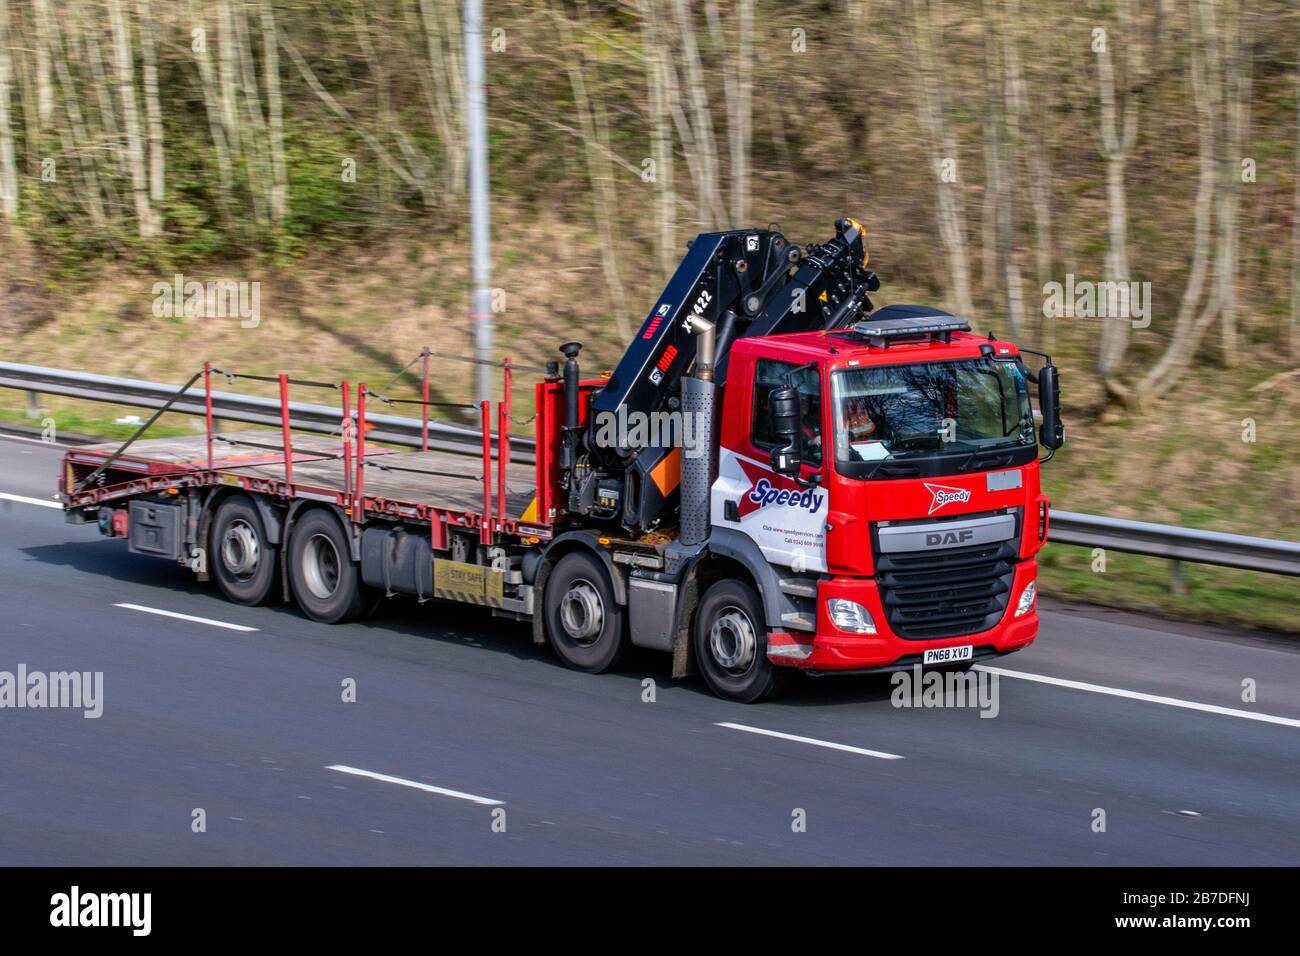 Speedy serices hiab recovery truck; HGV Haulage delivery trucks, lorry, transportation, truck, cargo carrier, DAF vehicle, European commercial transport industry, M61 at Manchester, UK Stock Photo